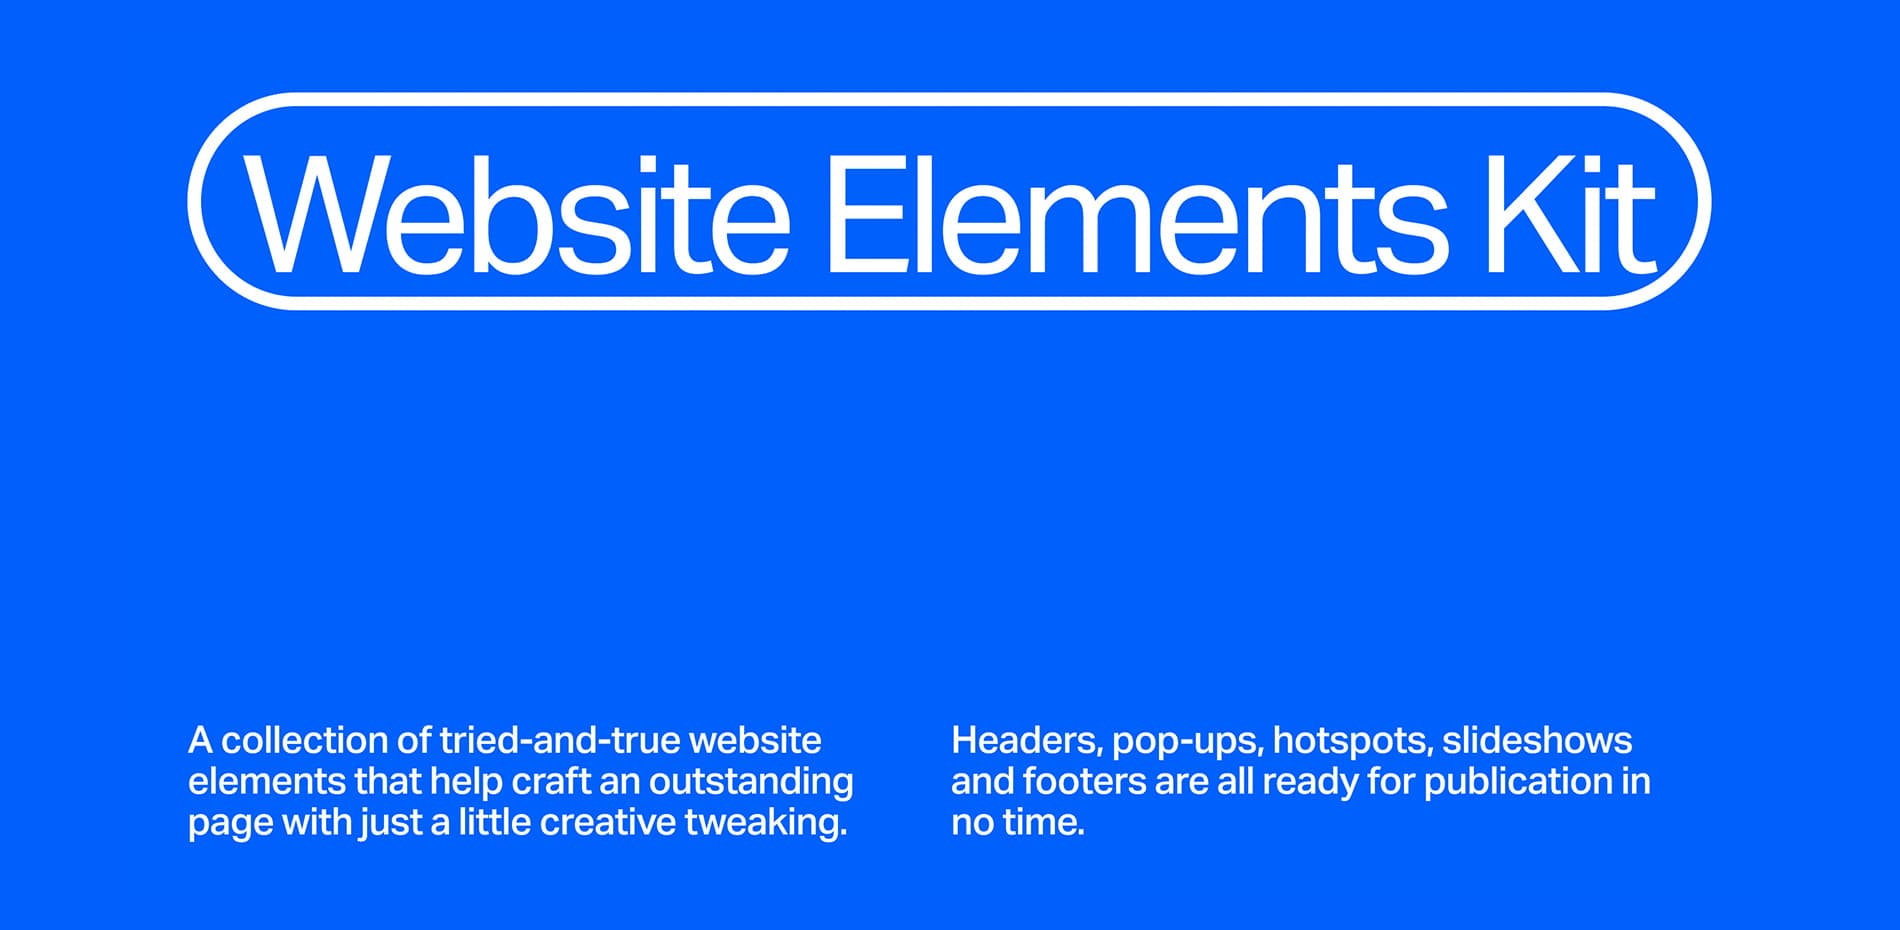 Website Elements Kit: Readymag plays with the limits to encourage invention